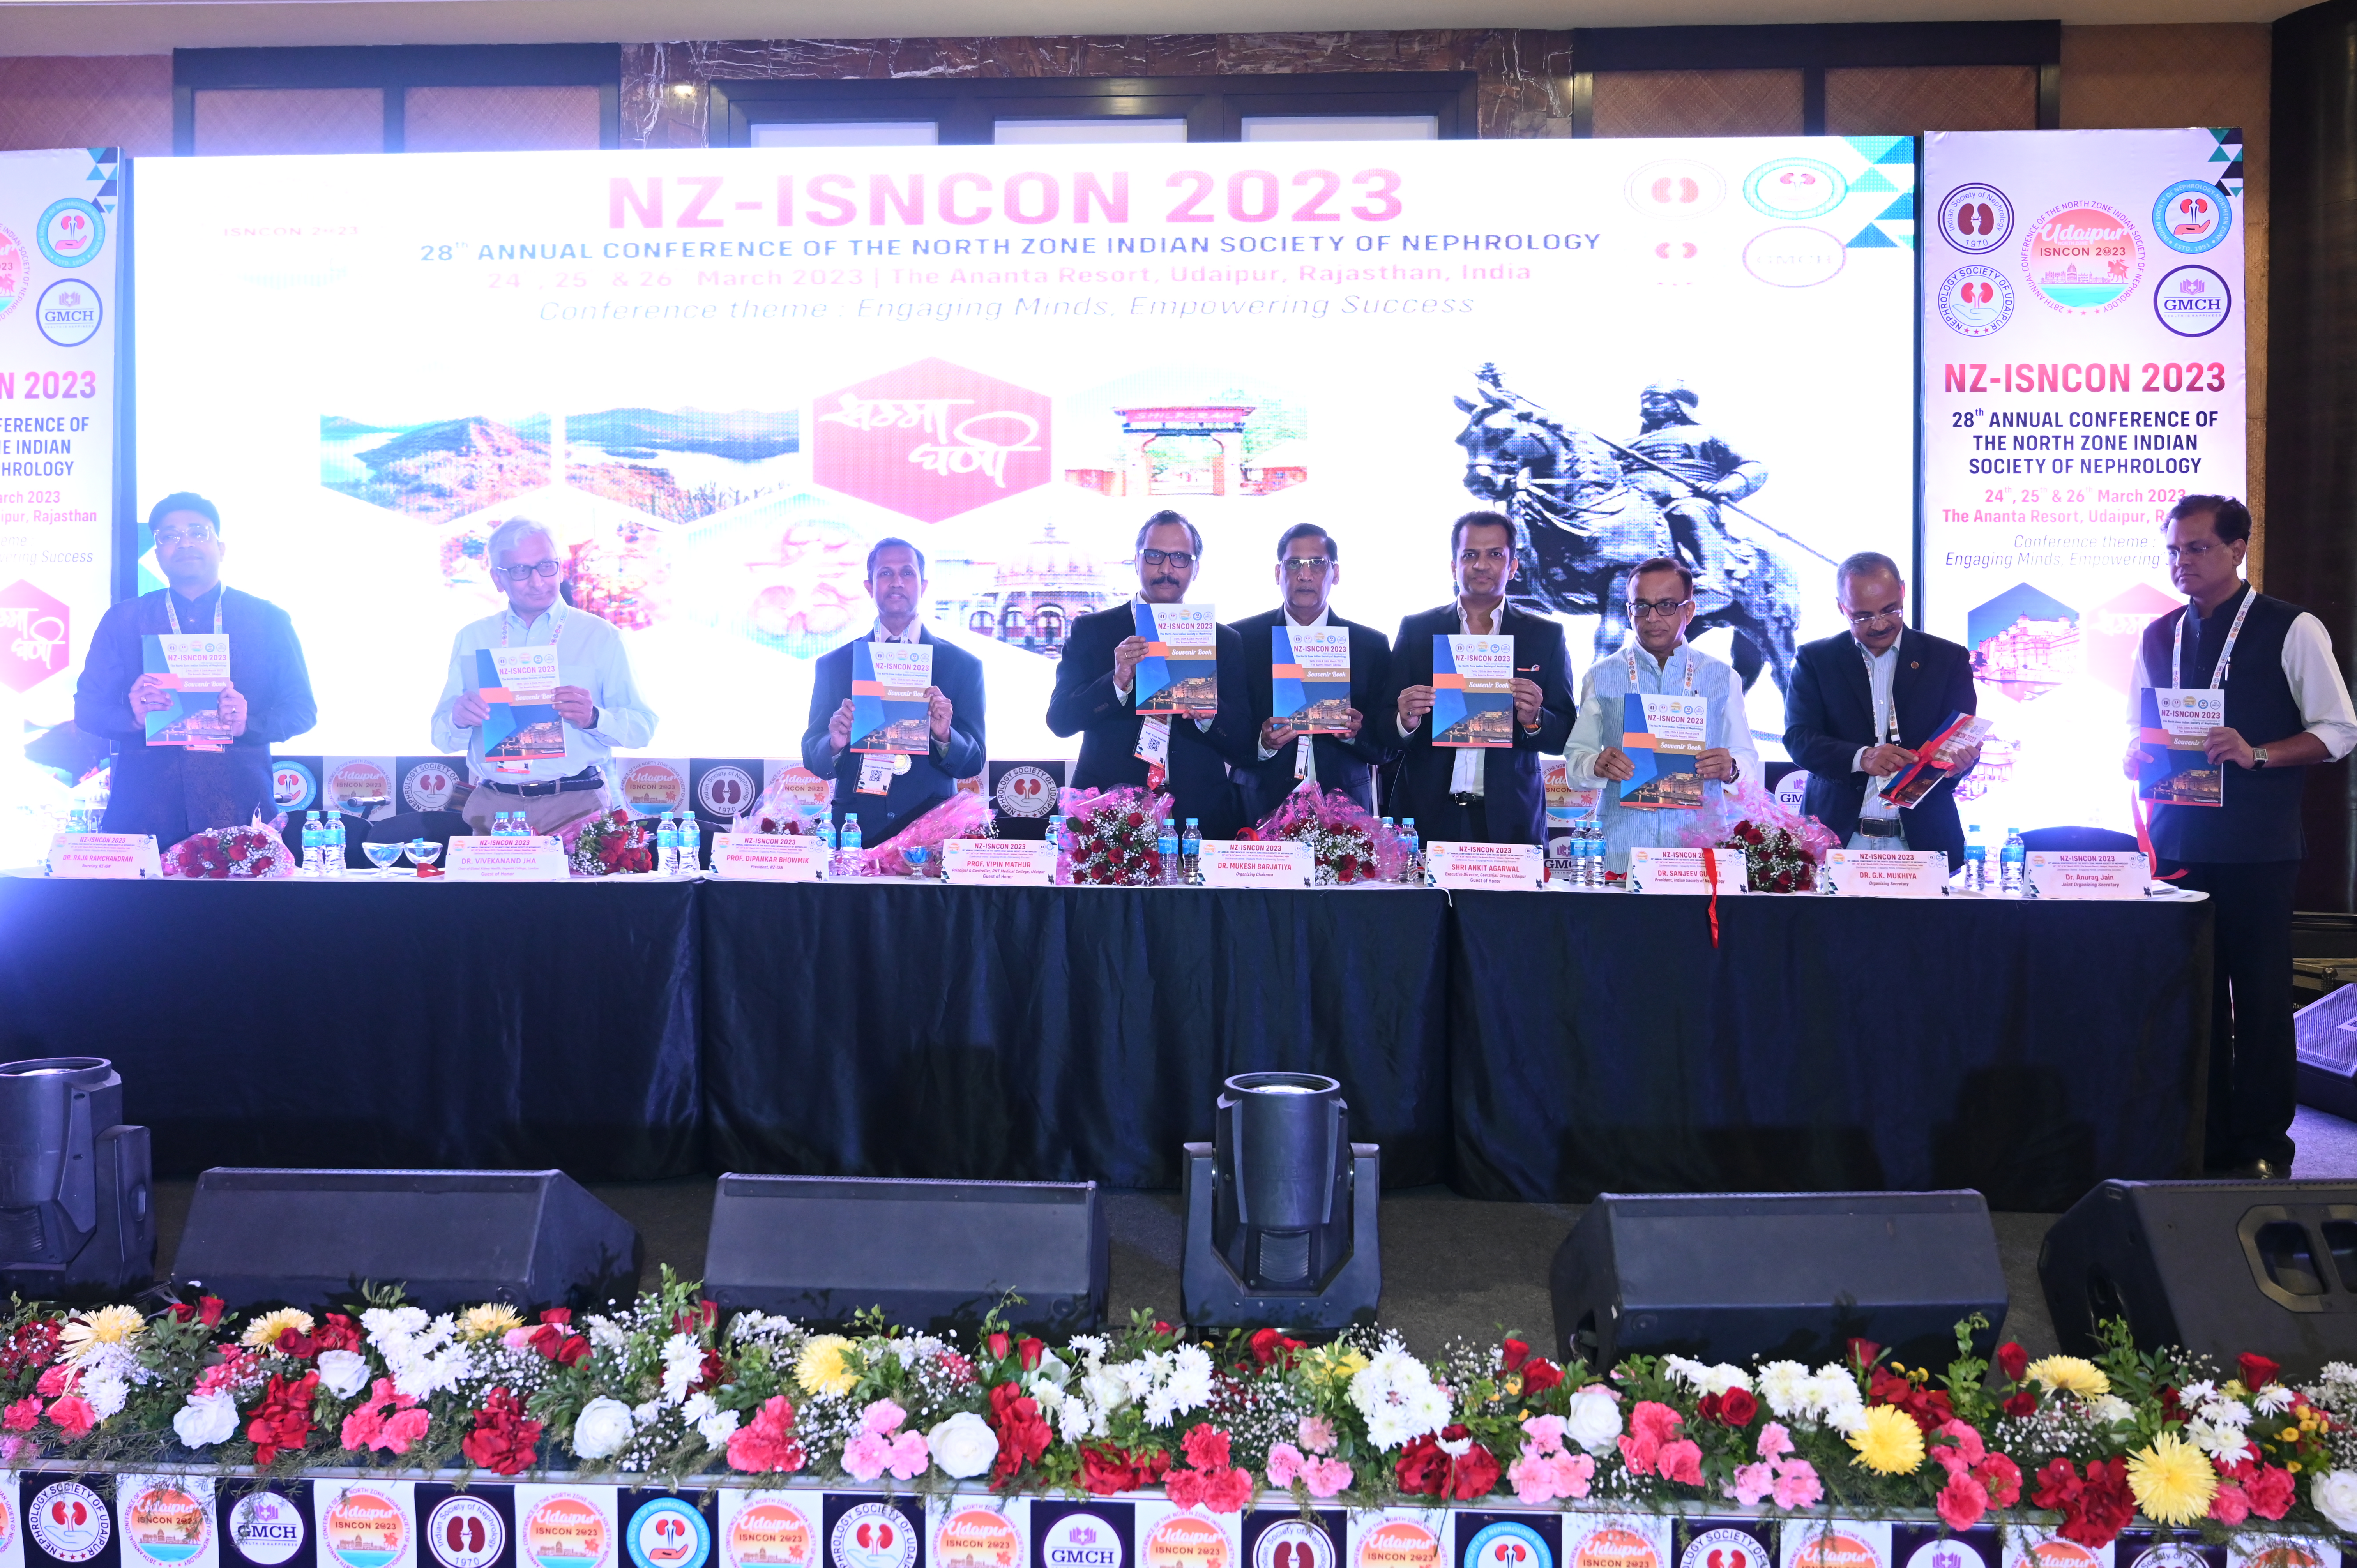 28th Annual Conference of North Zone Indian Society of Nephrology organized